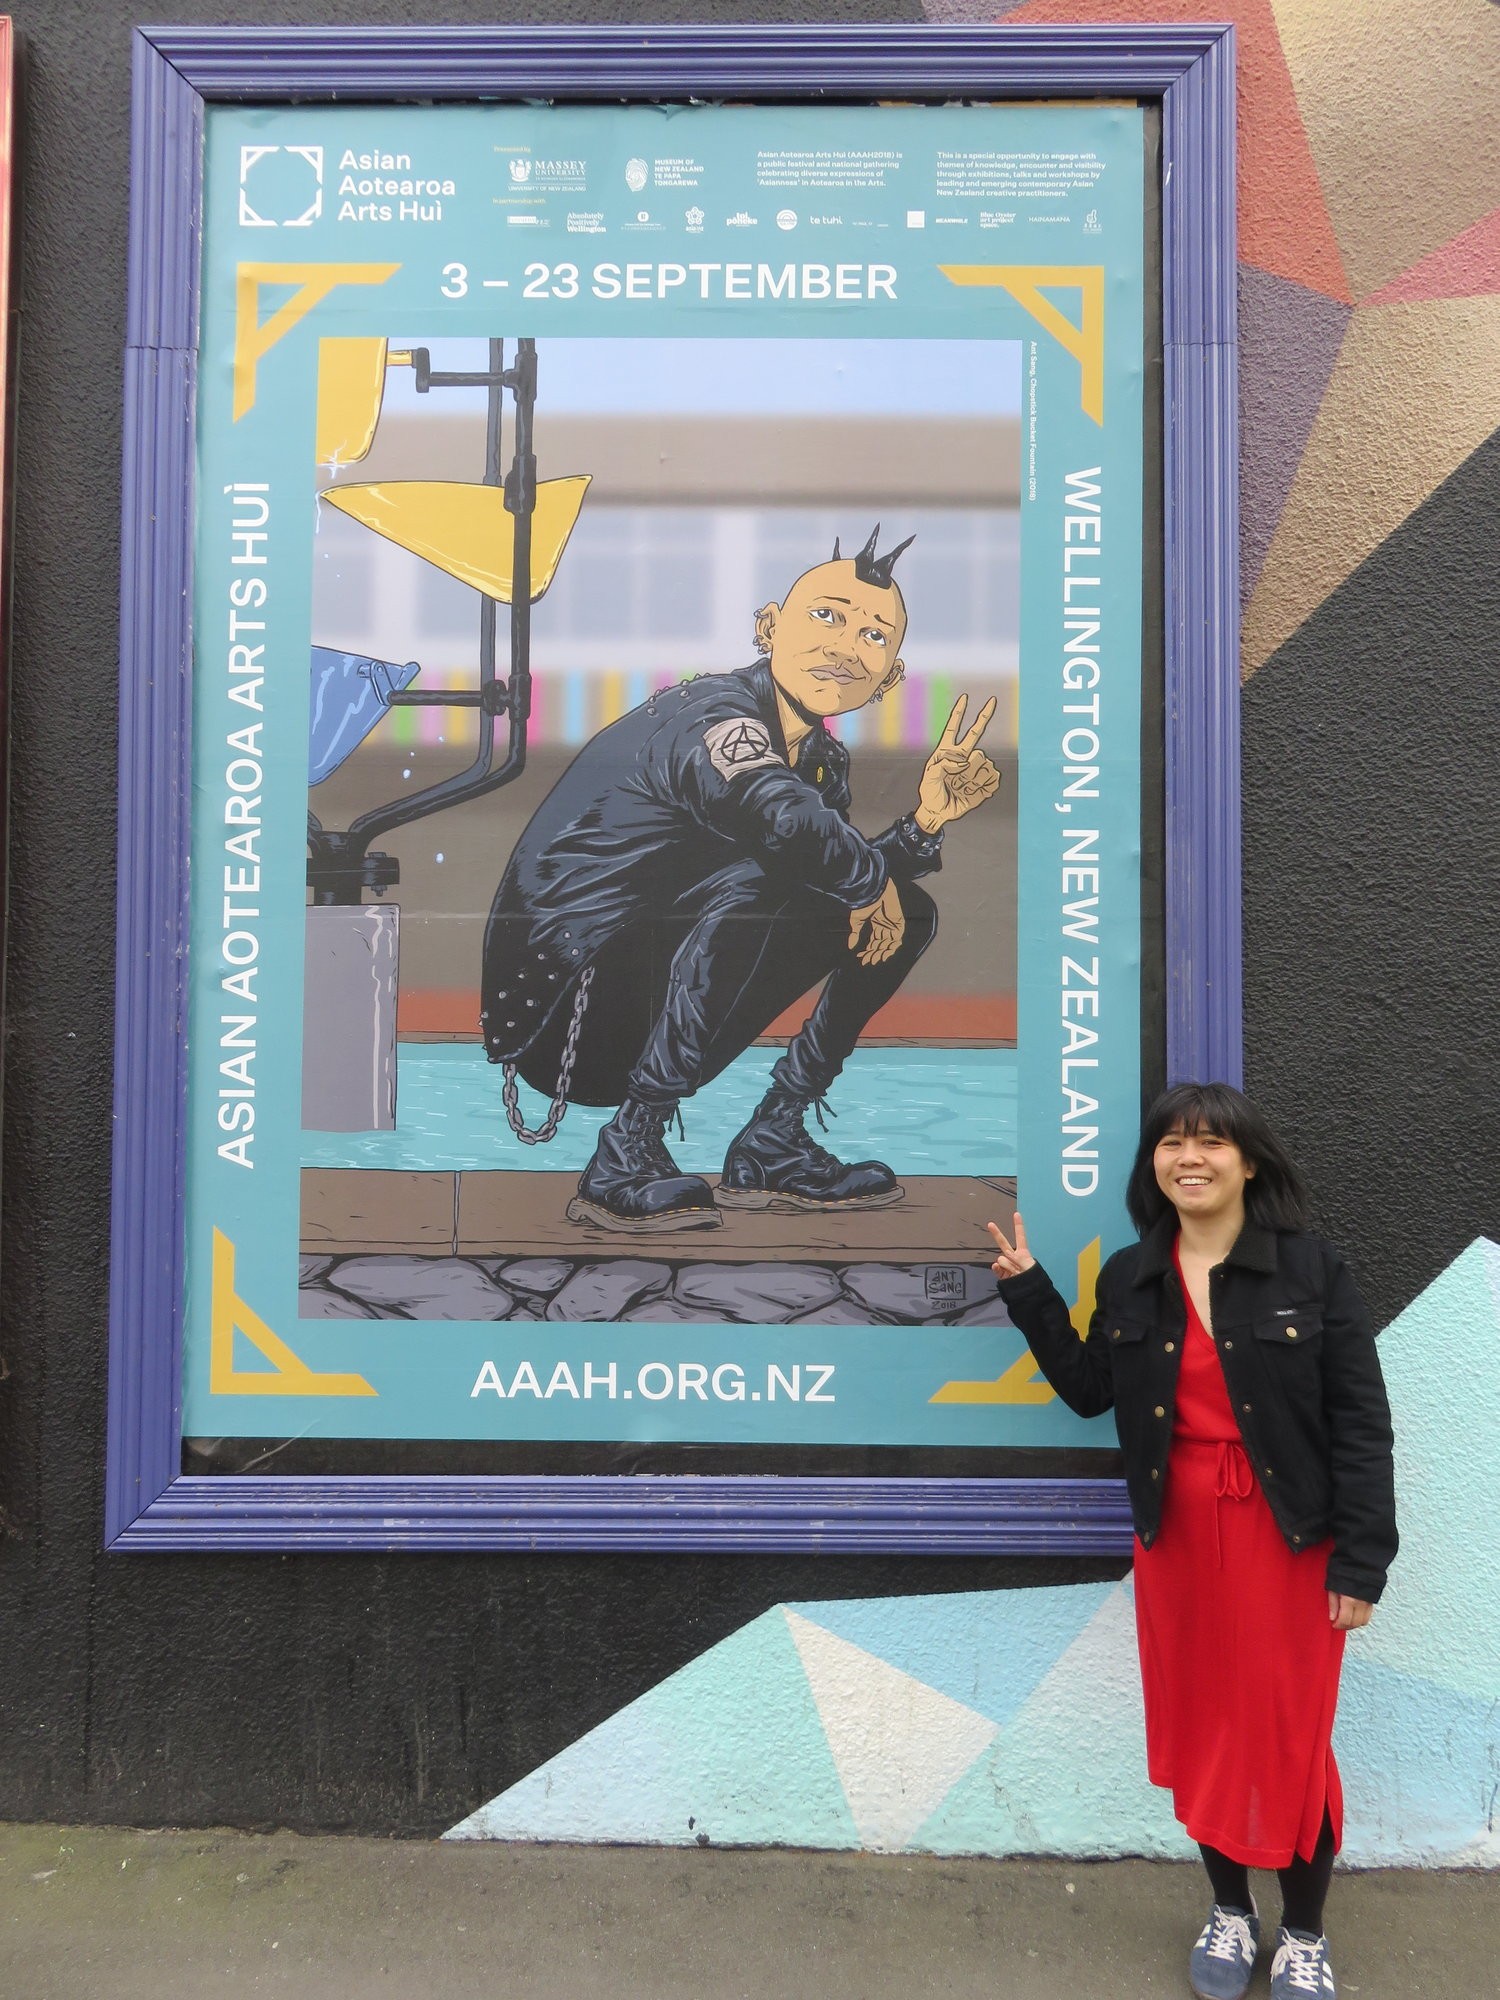 A smiling Kerry Ann Lee does the peace sign with her fingers in front of a large poster for the hui, featuring the work of Ant Sang.